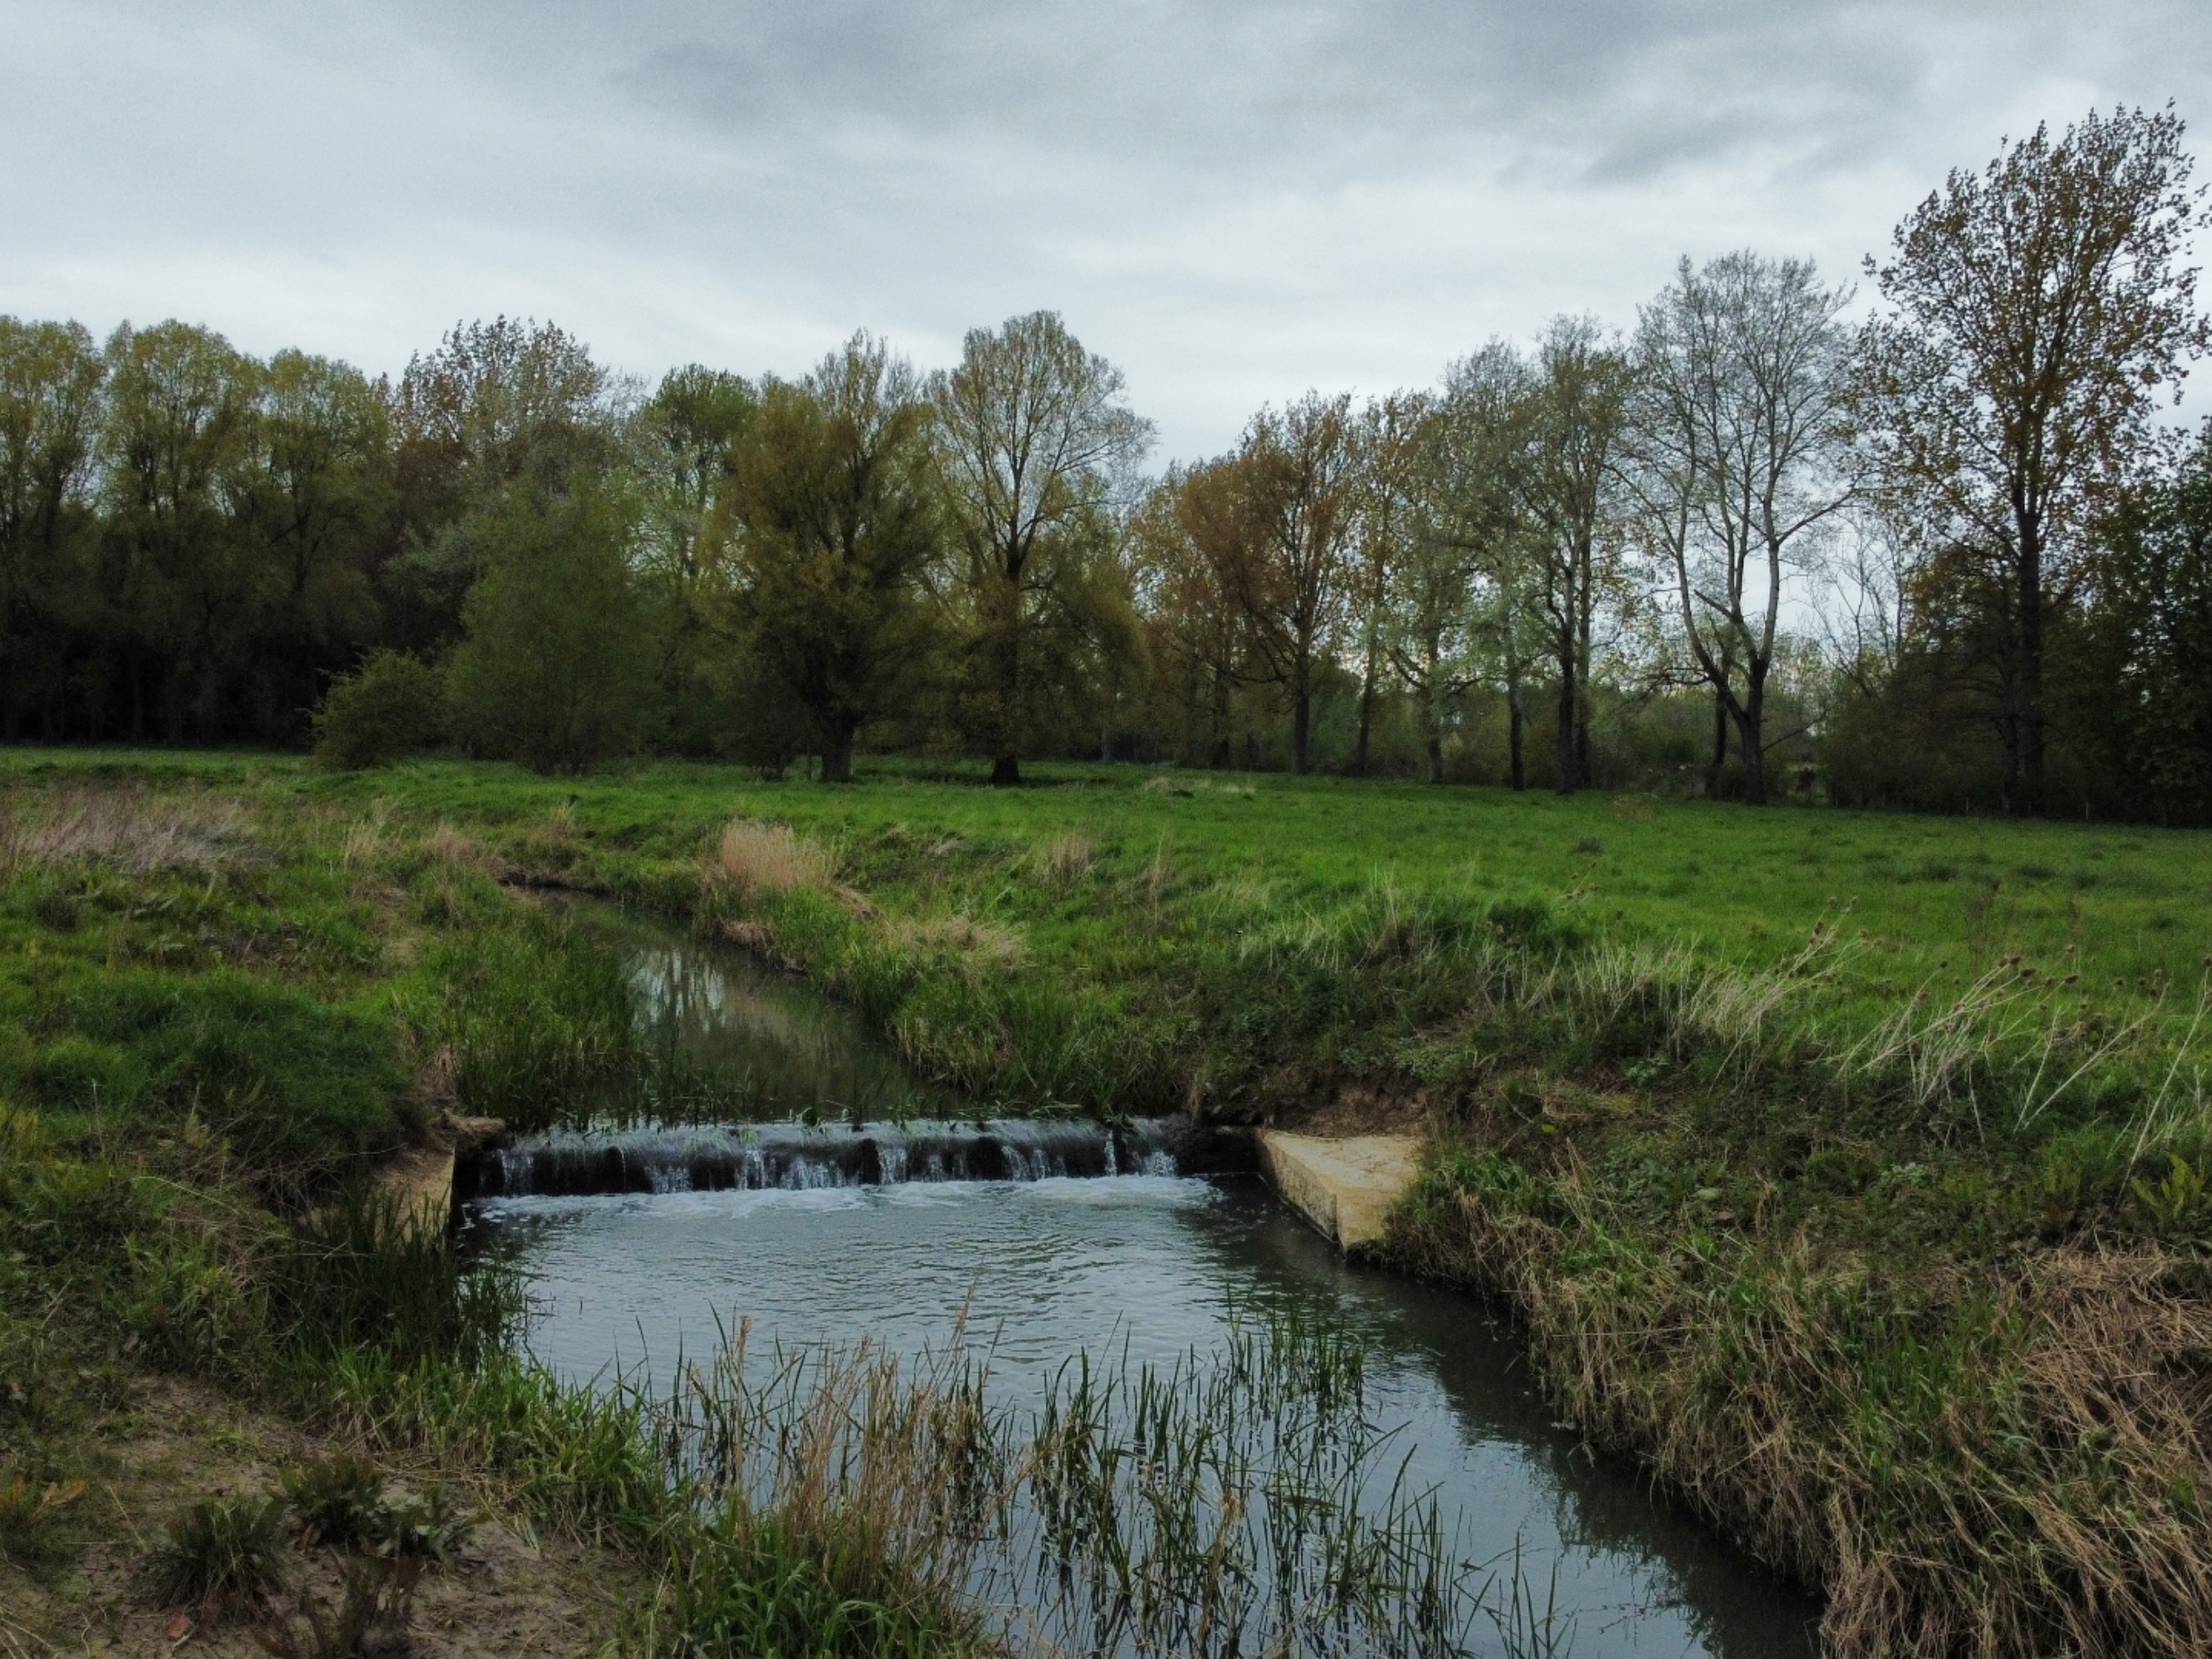 Bruern weir removal project near the village of Milton Under Wychwood, in West Oxfordshire, UK